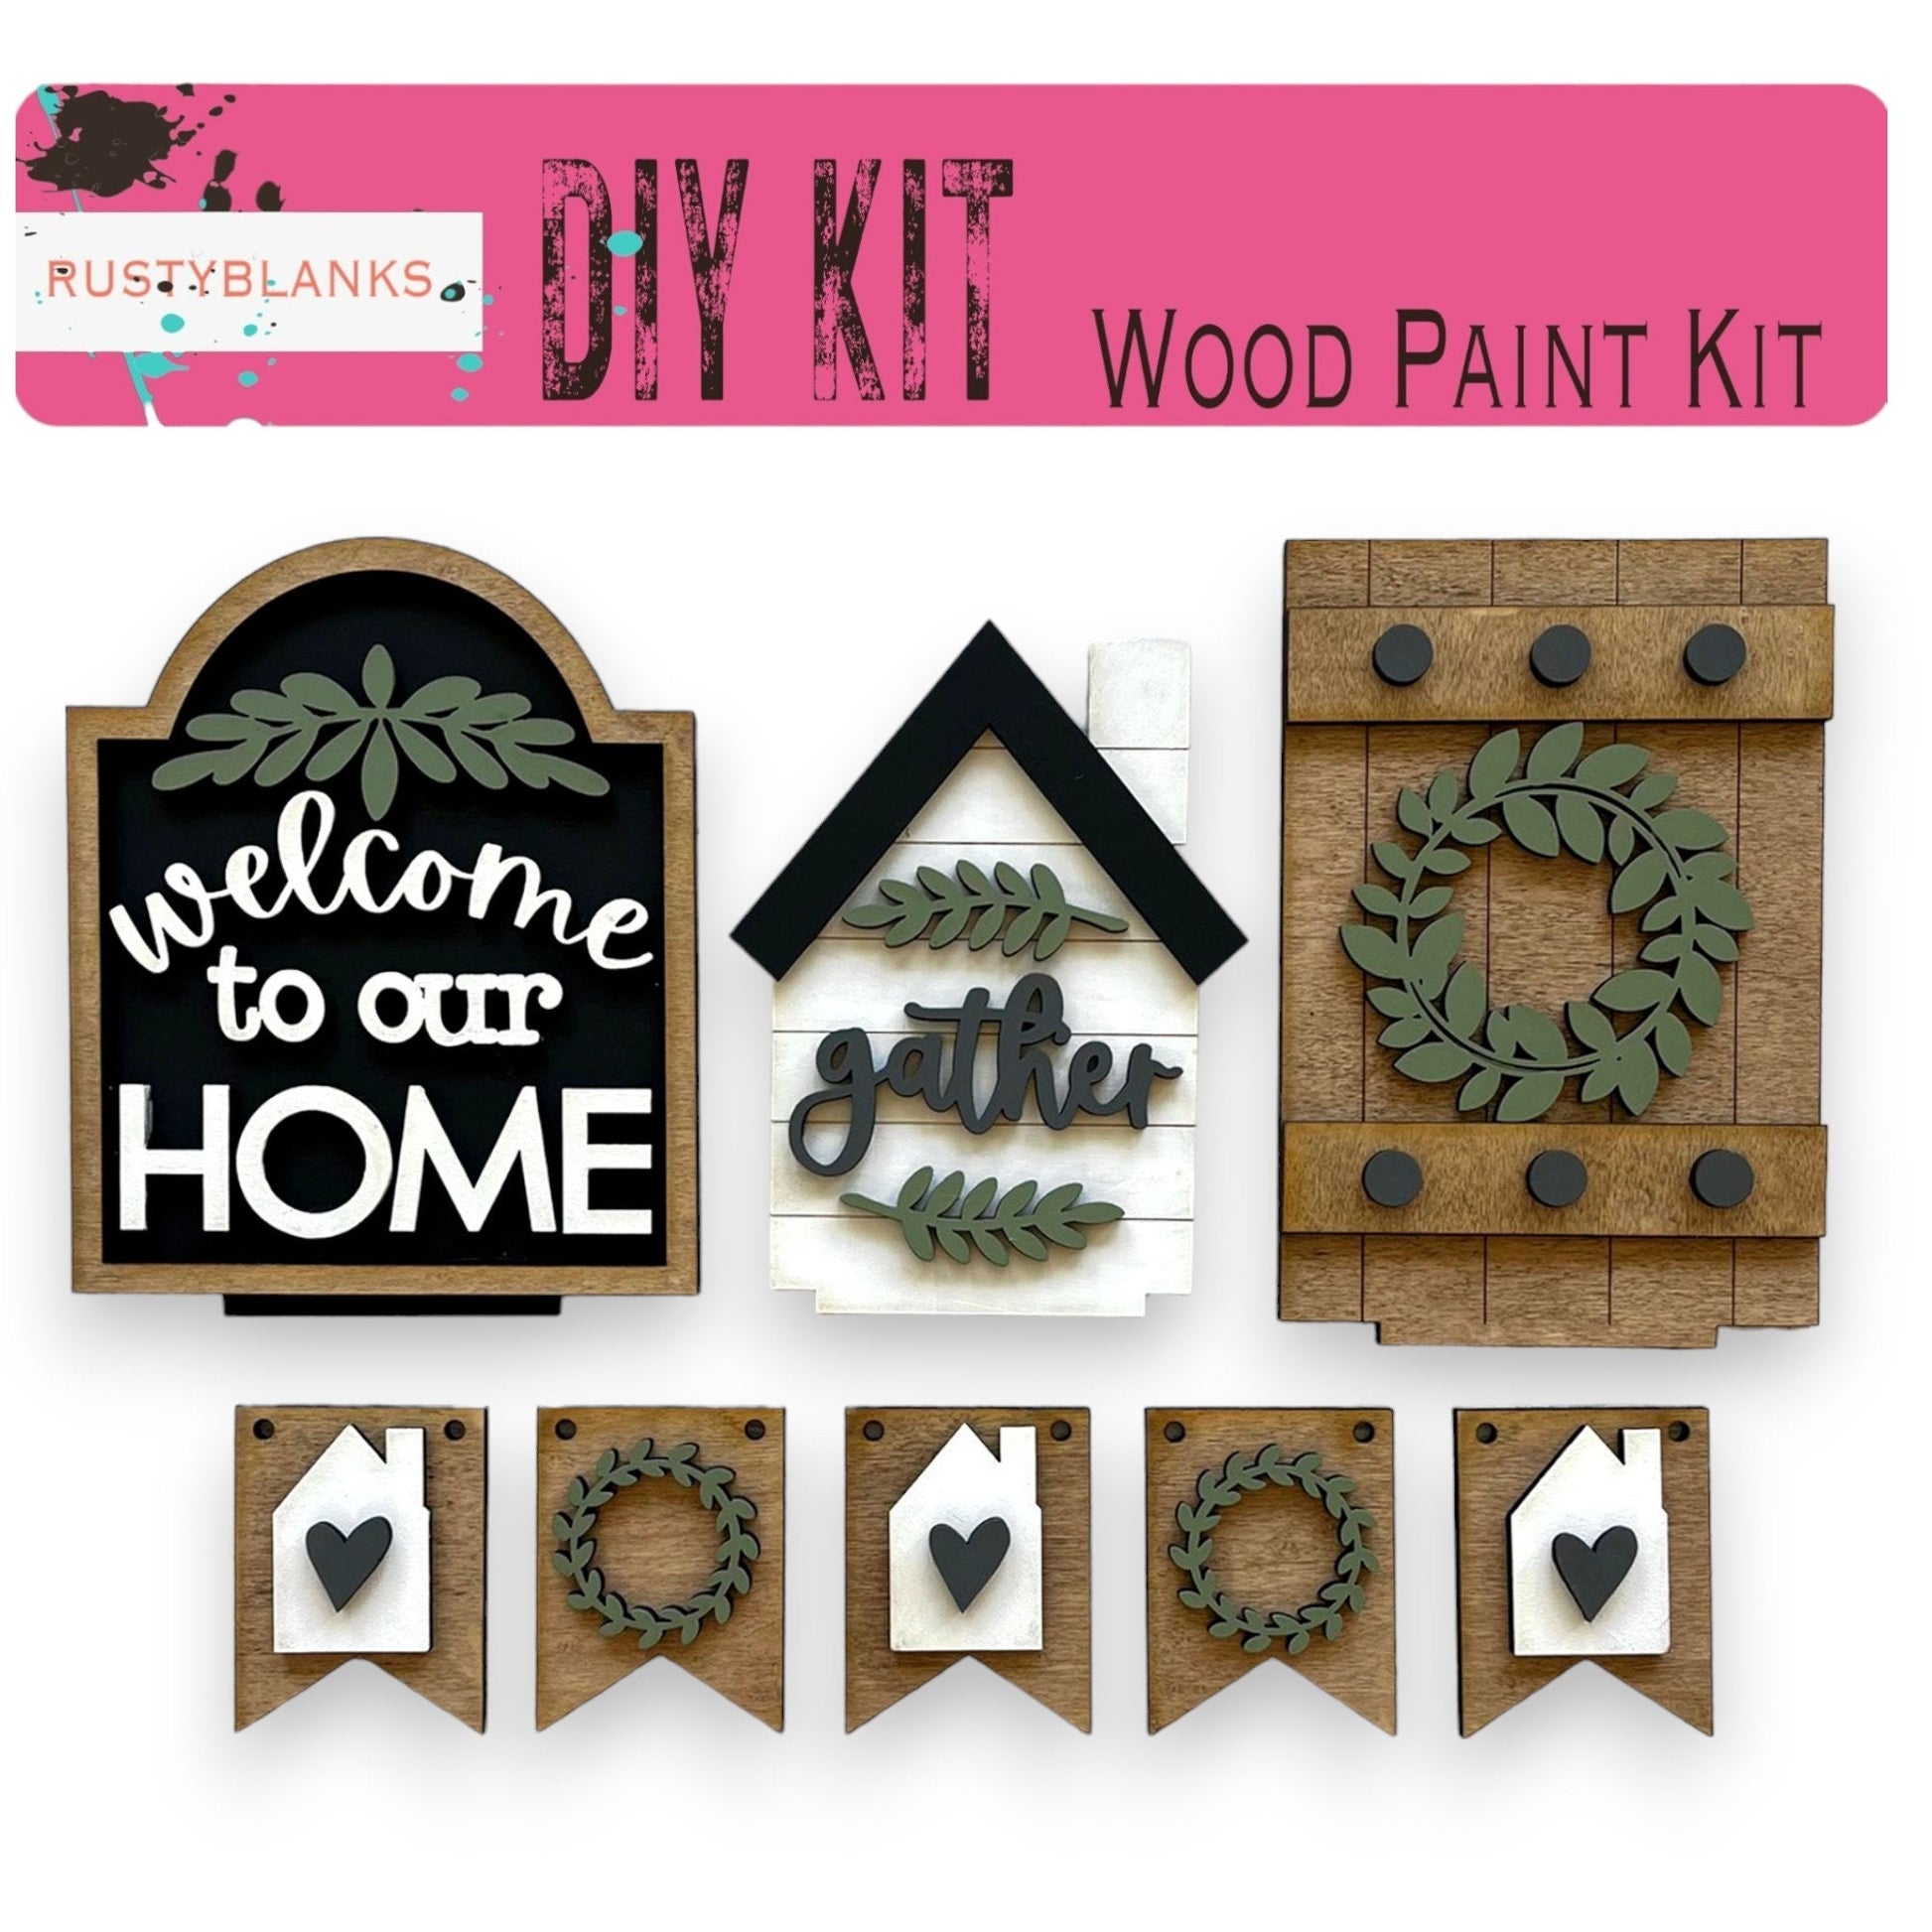 a picture of a wood paint kit